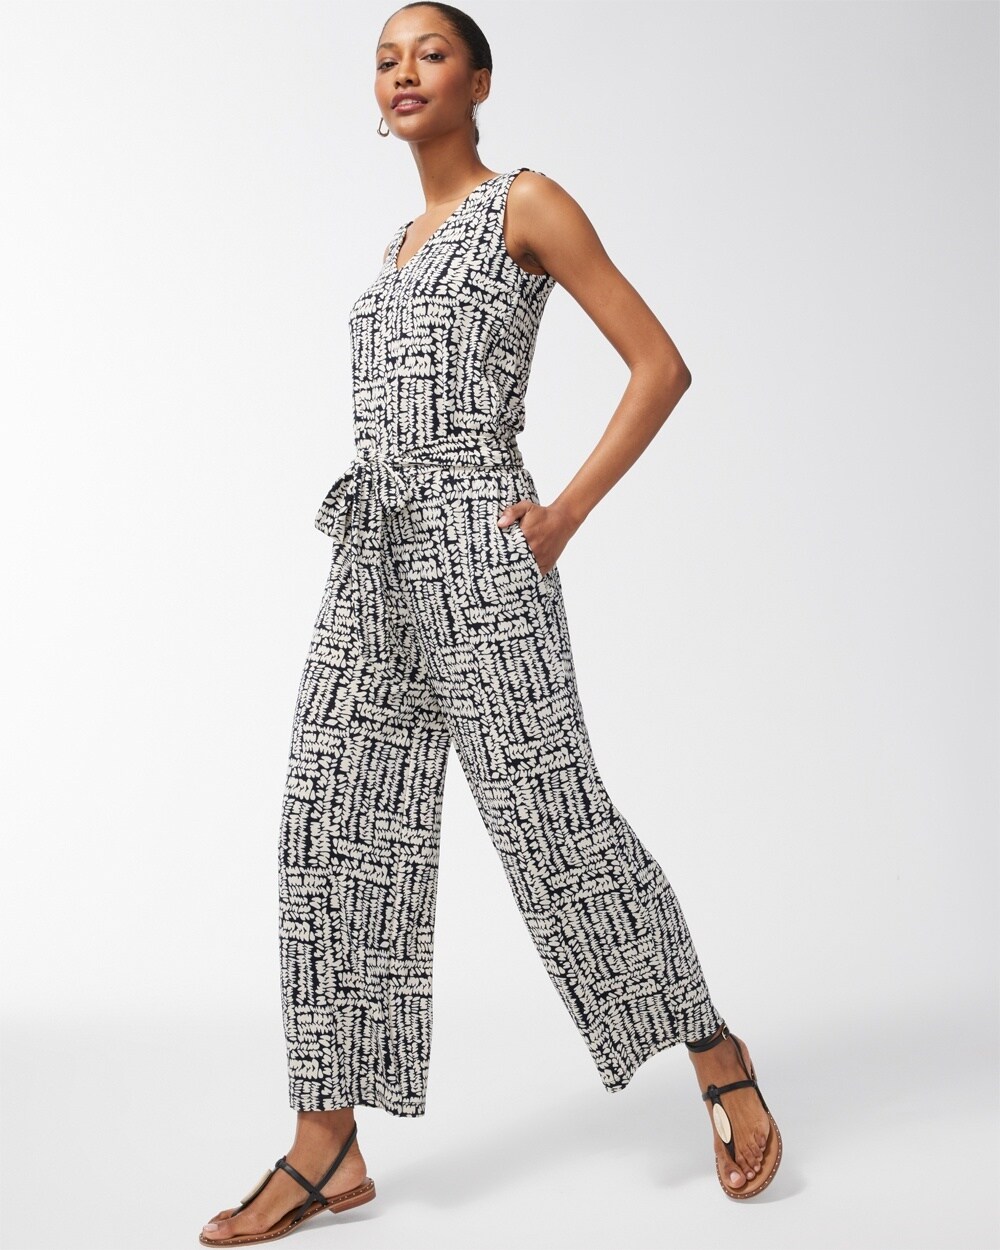 Travelers Pebble Print Tie Waist Jumpsuit video preview image, click to start video